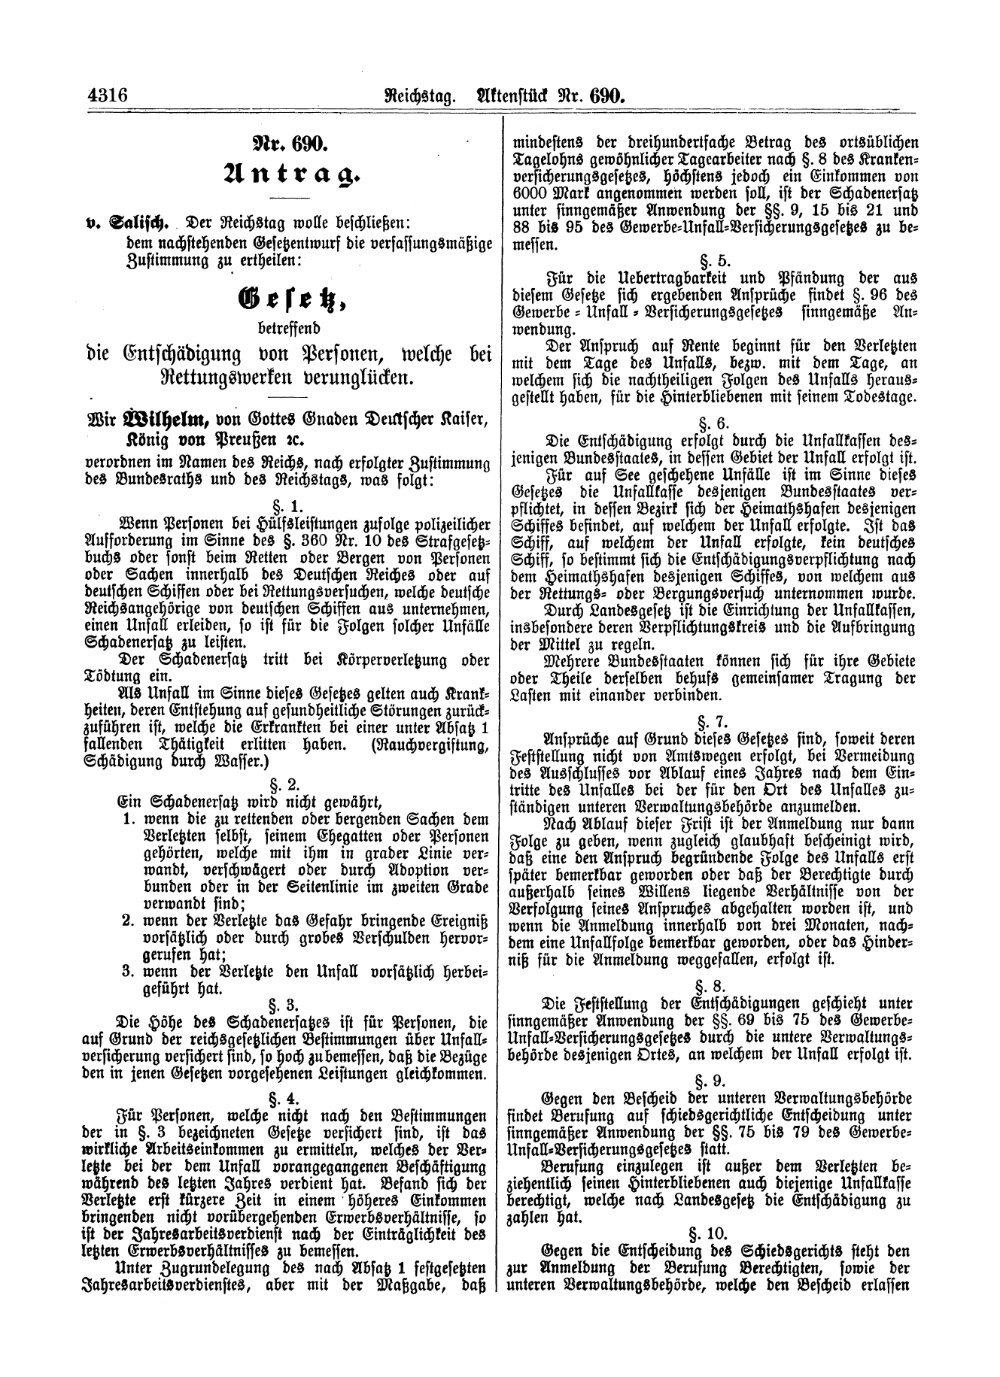 Scan of page 4316